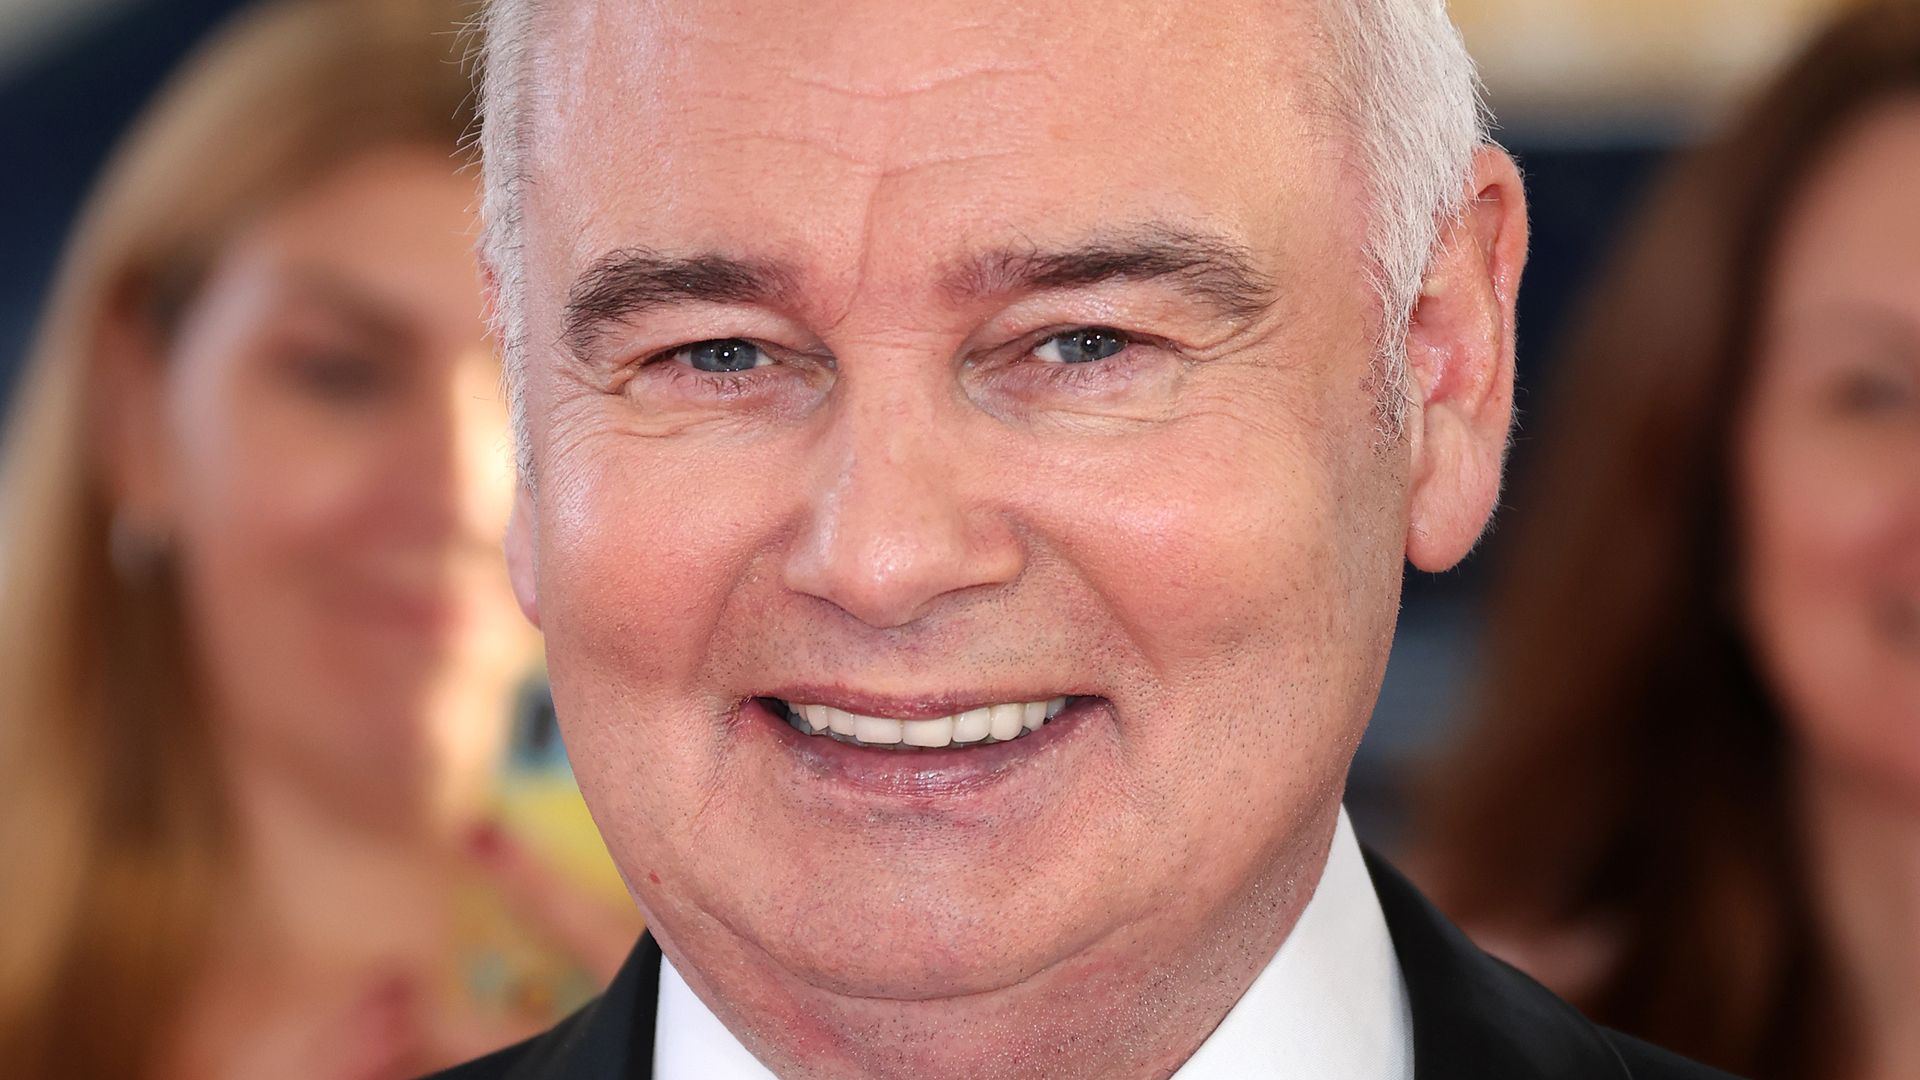 Eamonn Holmes smiling in a bow tie